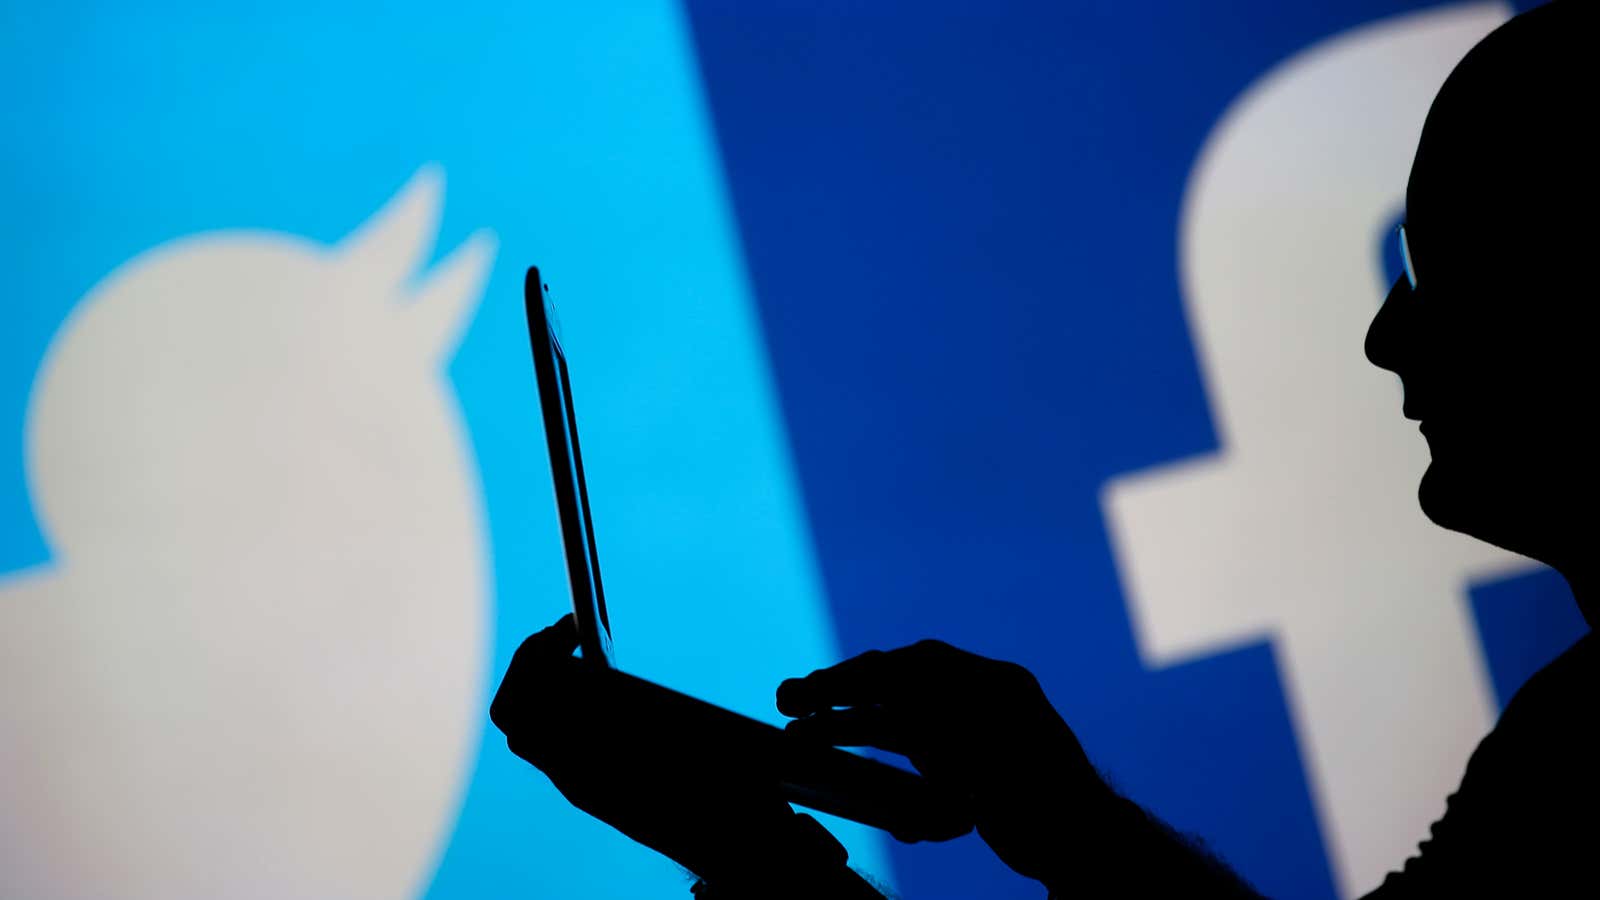 How to find out how much—or how little—Facebook and Twitter know about your interests.